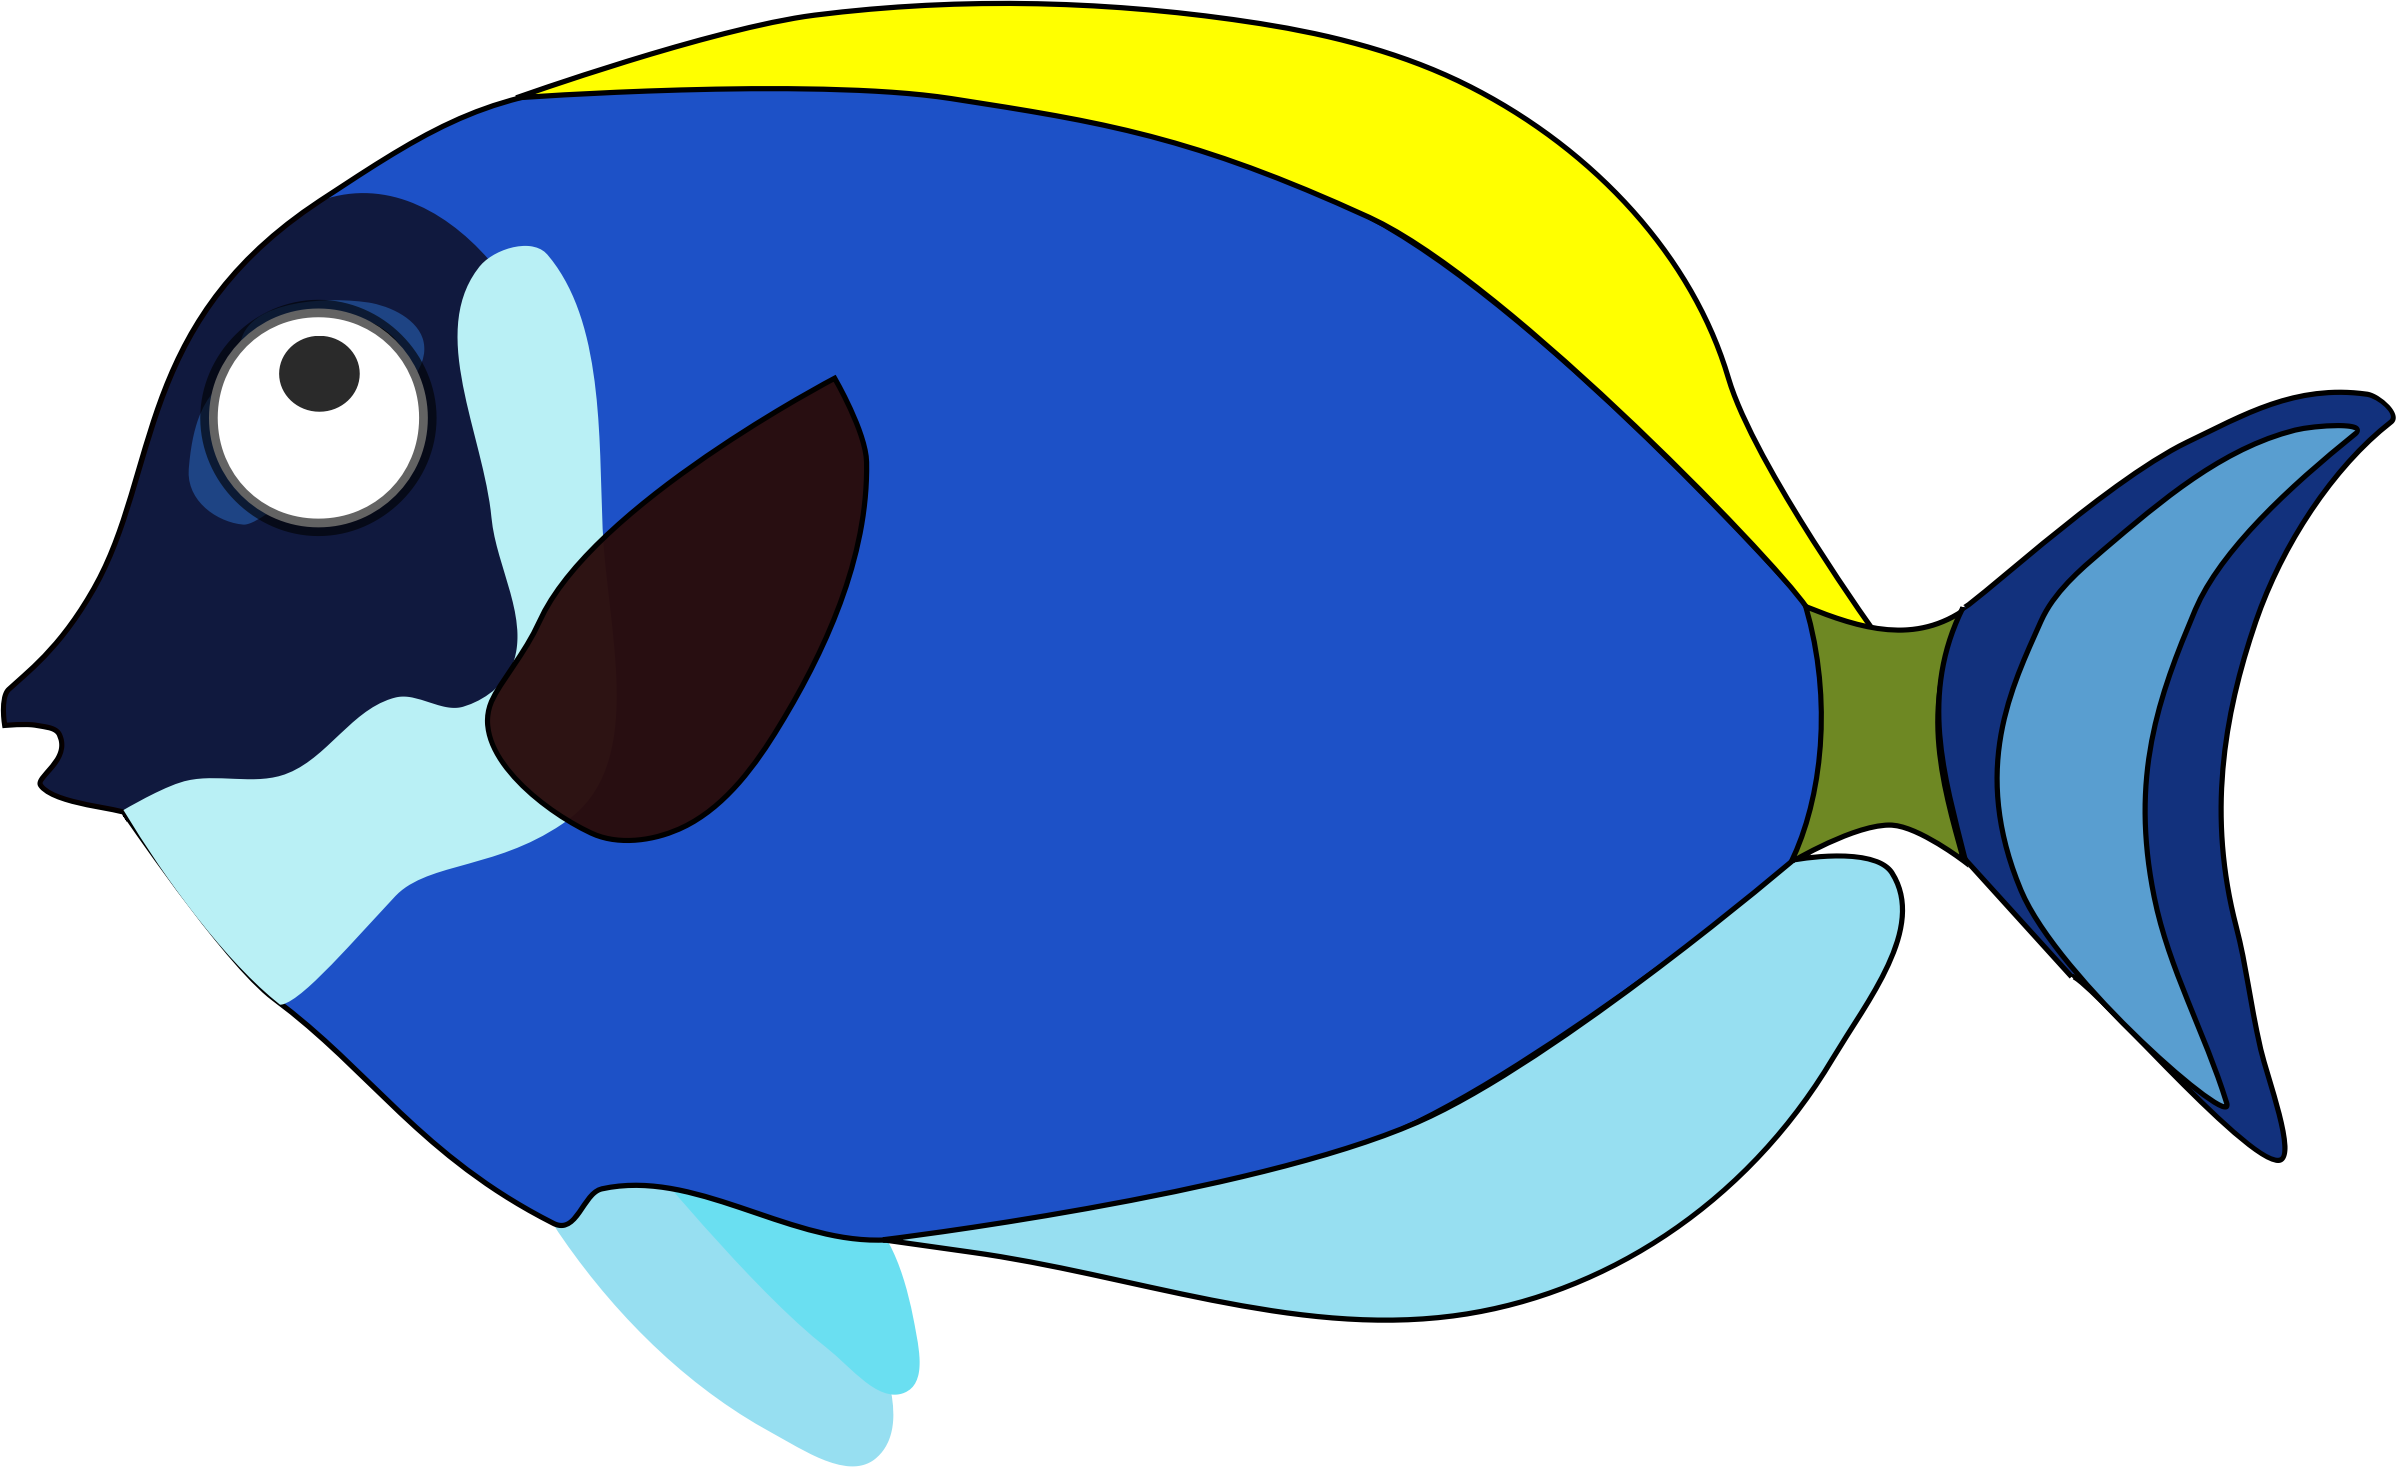 Blue Cartoon Fish Images | www.pixshark.com - Images Galleries With A Bite!